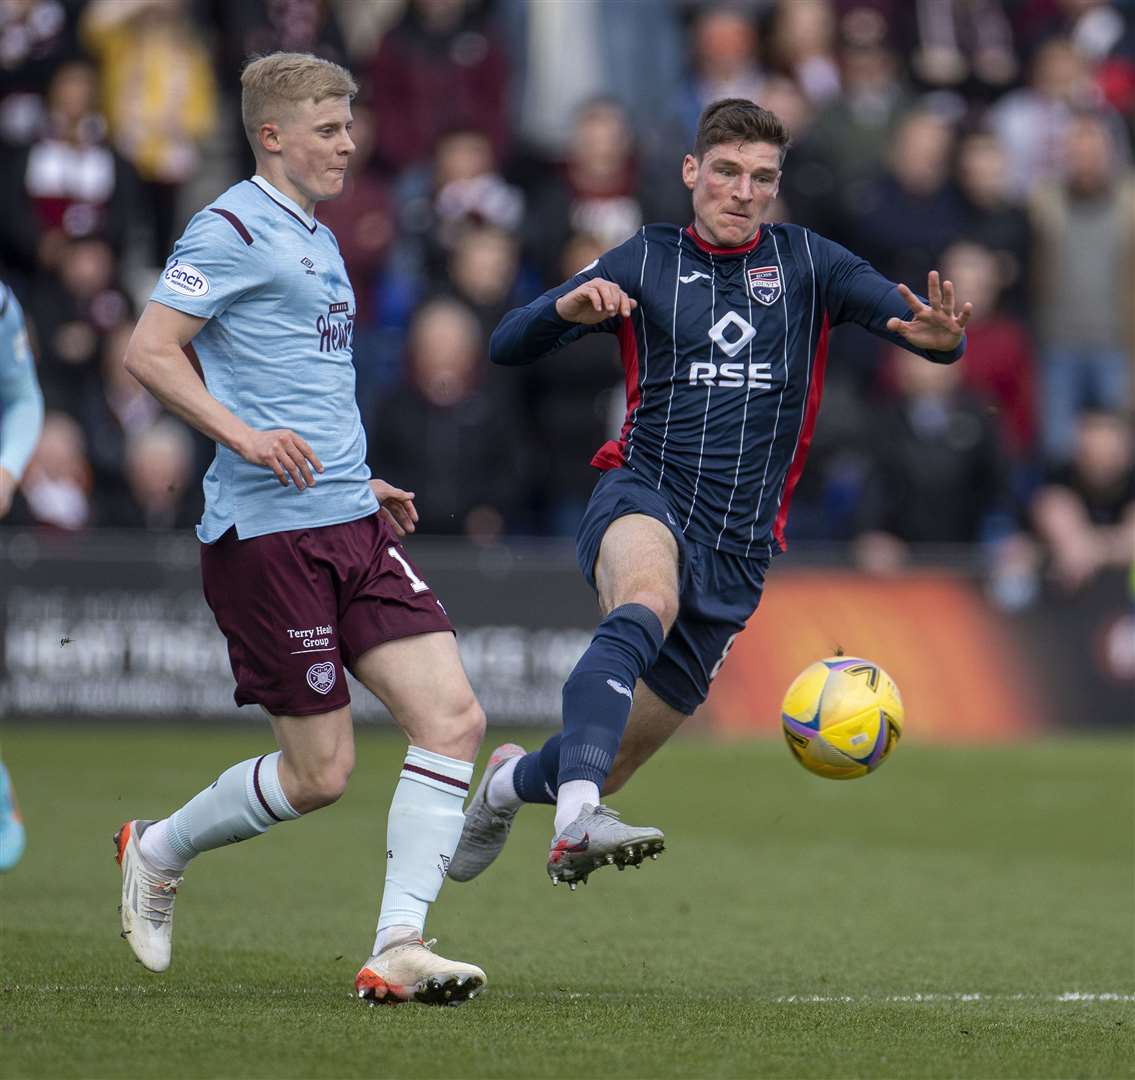 County's matches against Hearts have been tight affairs this season – but the Staggies are yet to beat the Edinburgh outfit. Picture: Ken Macpherson